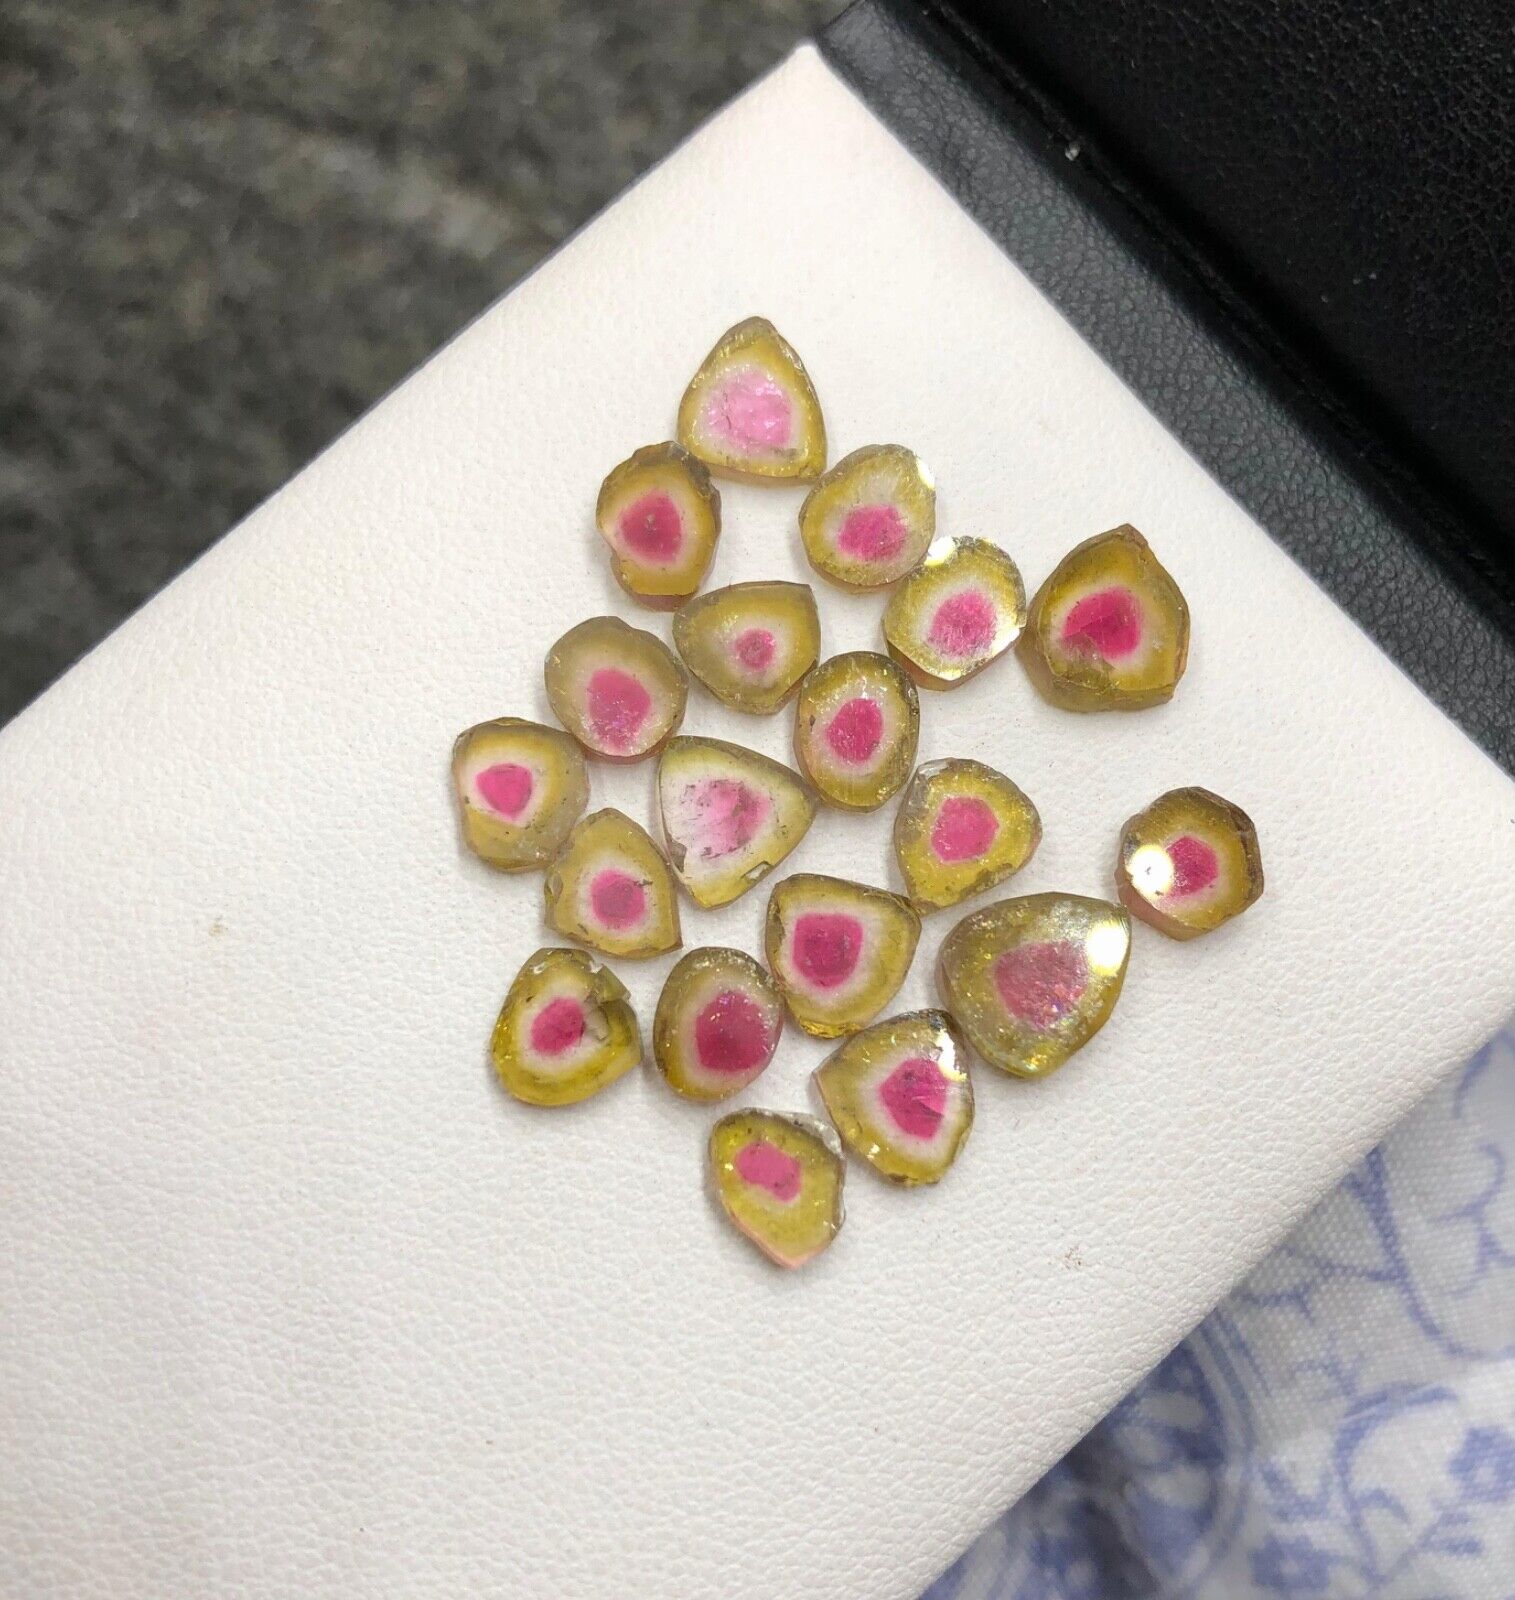 17.0 cts. Authentic Watermelon Tourmaline Gemstone Slices with Rainbows, Sourced